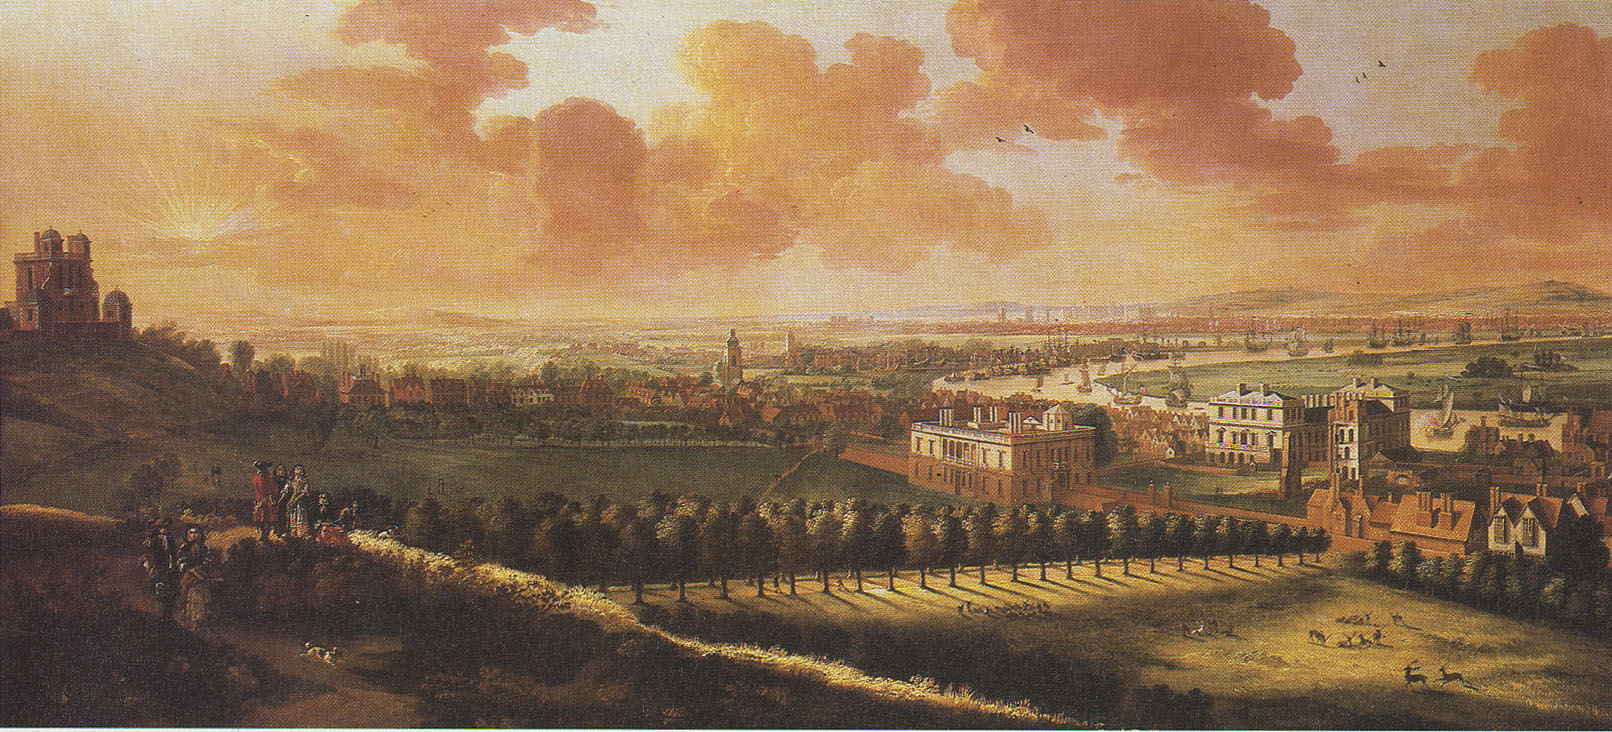 Johannes Vorsterman
Greenwich and London from One Tree Hill, 1680
olio su tela
National Maritime Museum di Greenwich
